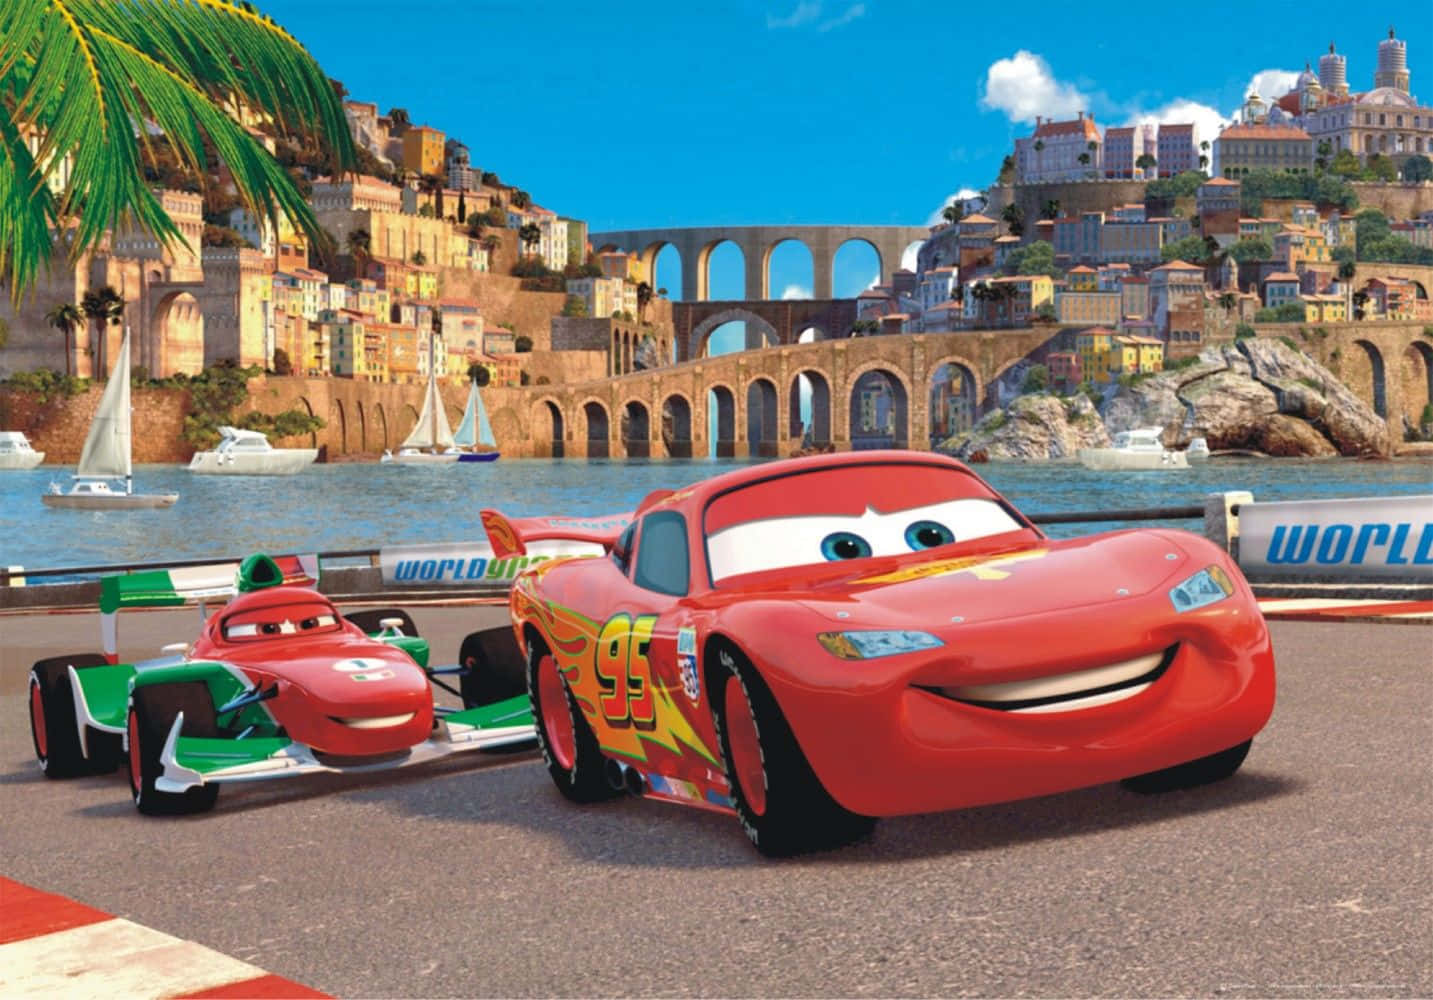 "Lightning McQueen and Mater Are Ready to Take on The World with Team Lightning"